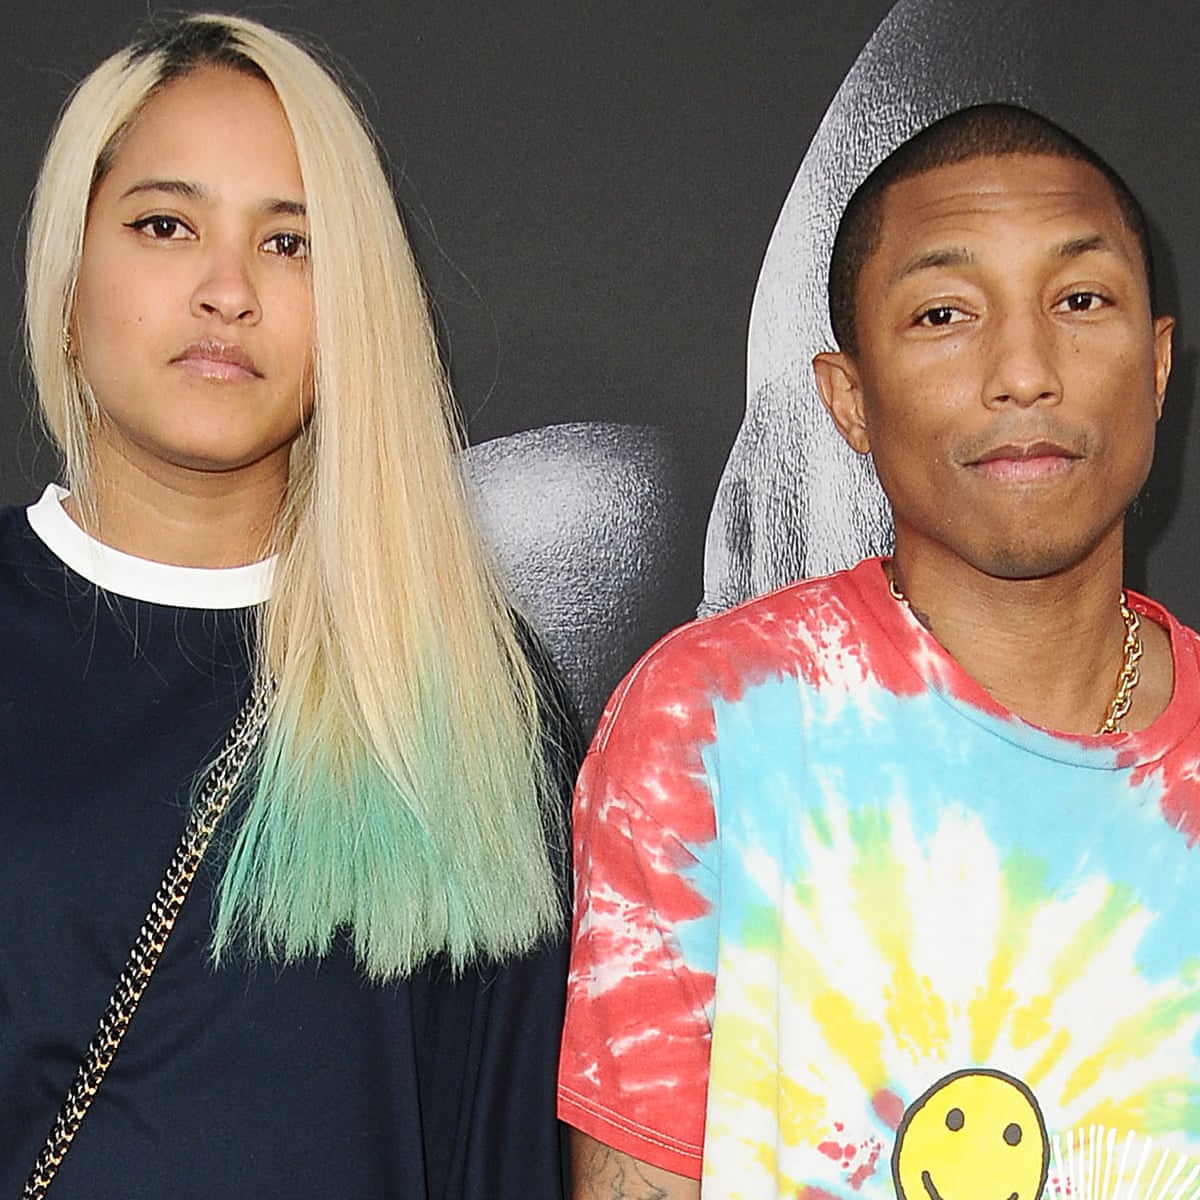 Not happy – why Pharrell Williams needs to update his views on childcare, Fashion